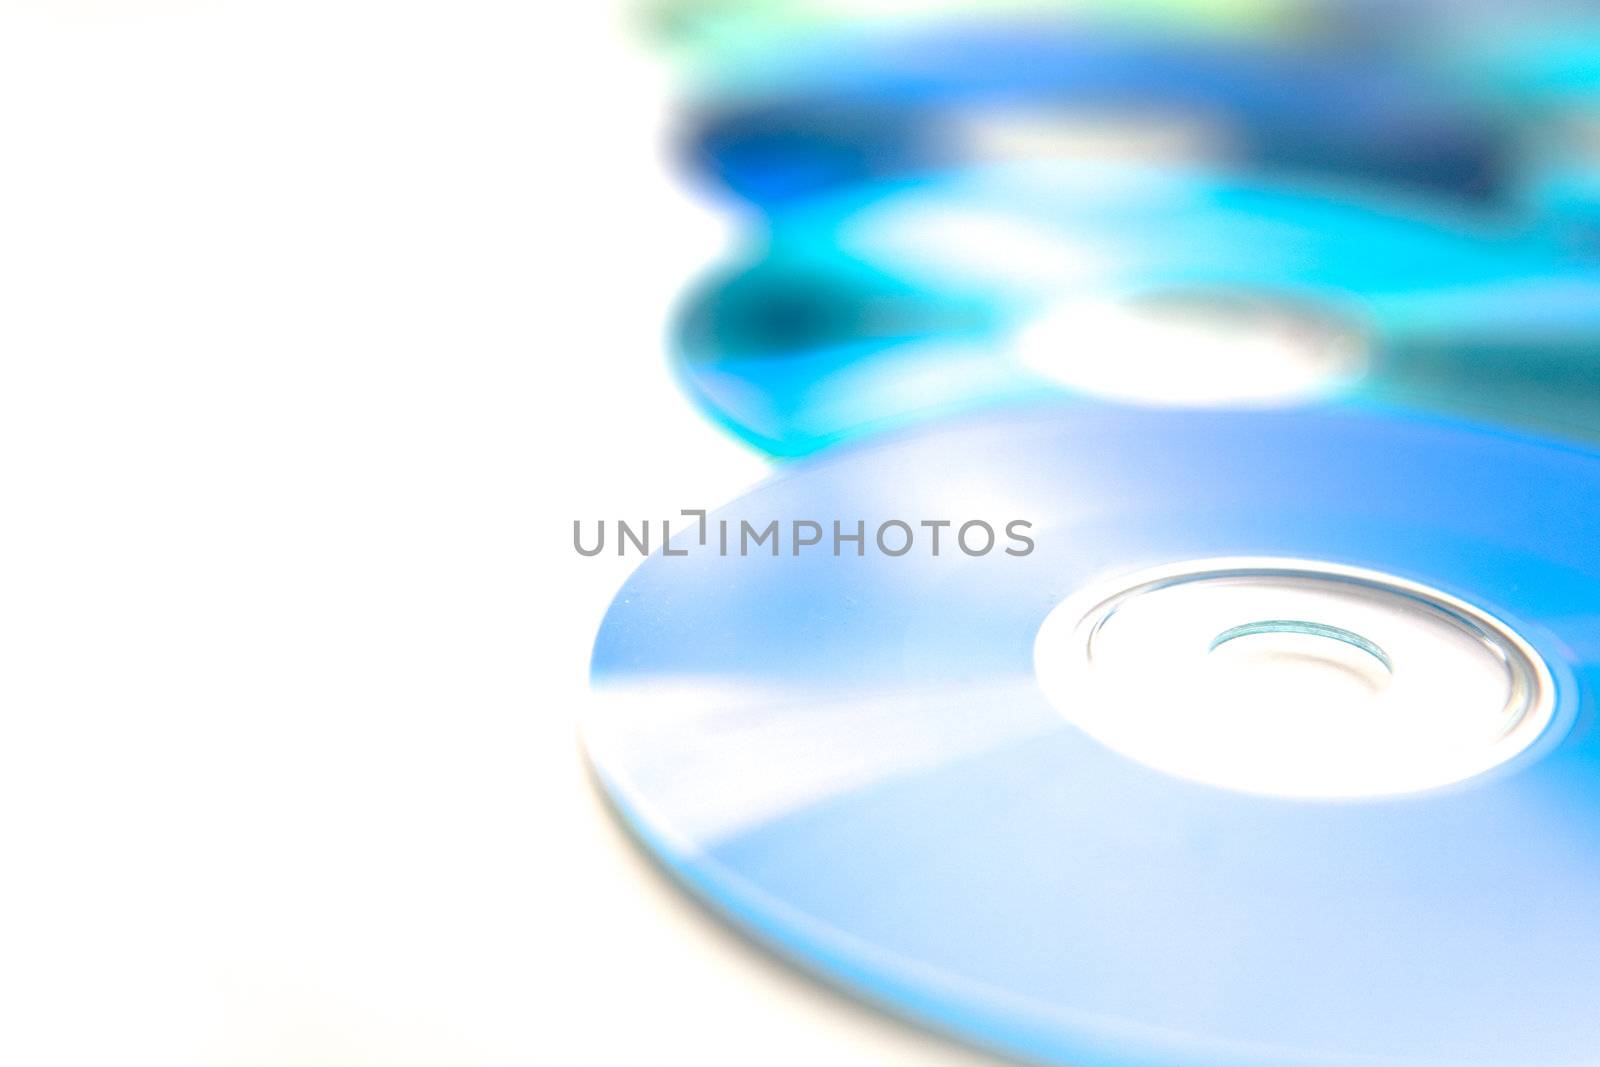 Recordable compact discs in an array - overexposed for graphical effect